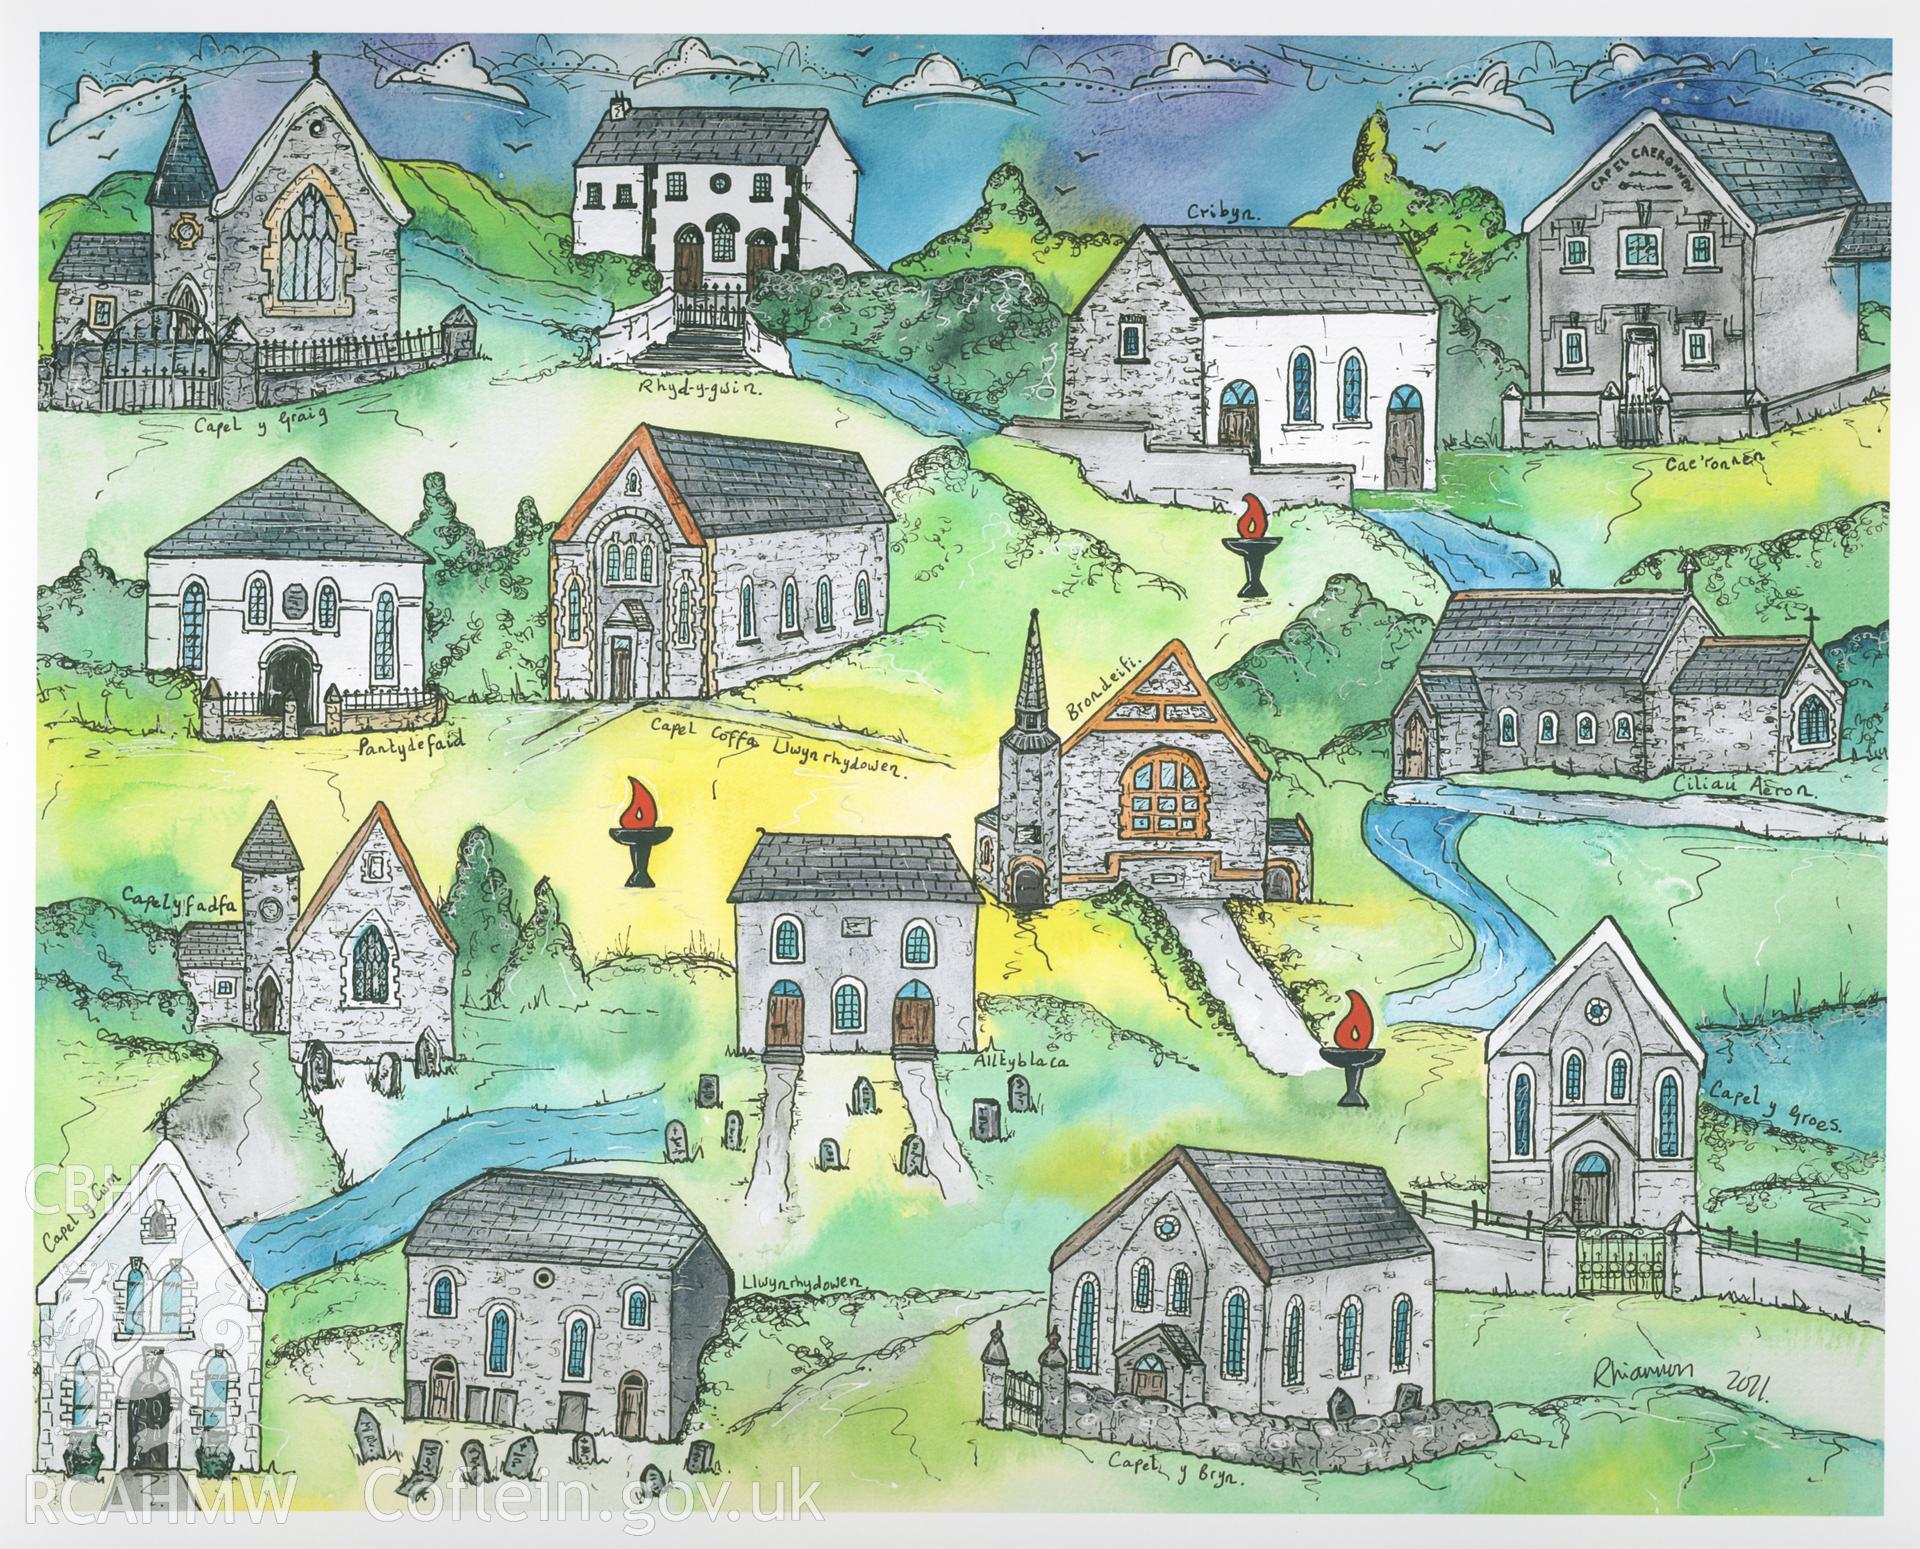 Coloured drawing of the Unitarian Chapels of the 'Smotyn Du'. Donated to the RCAHMW during the Digital Dissent Project.